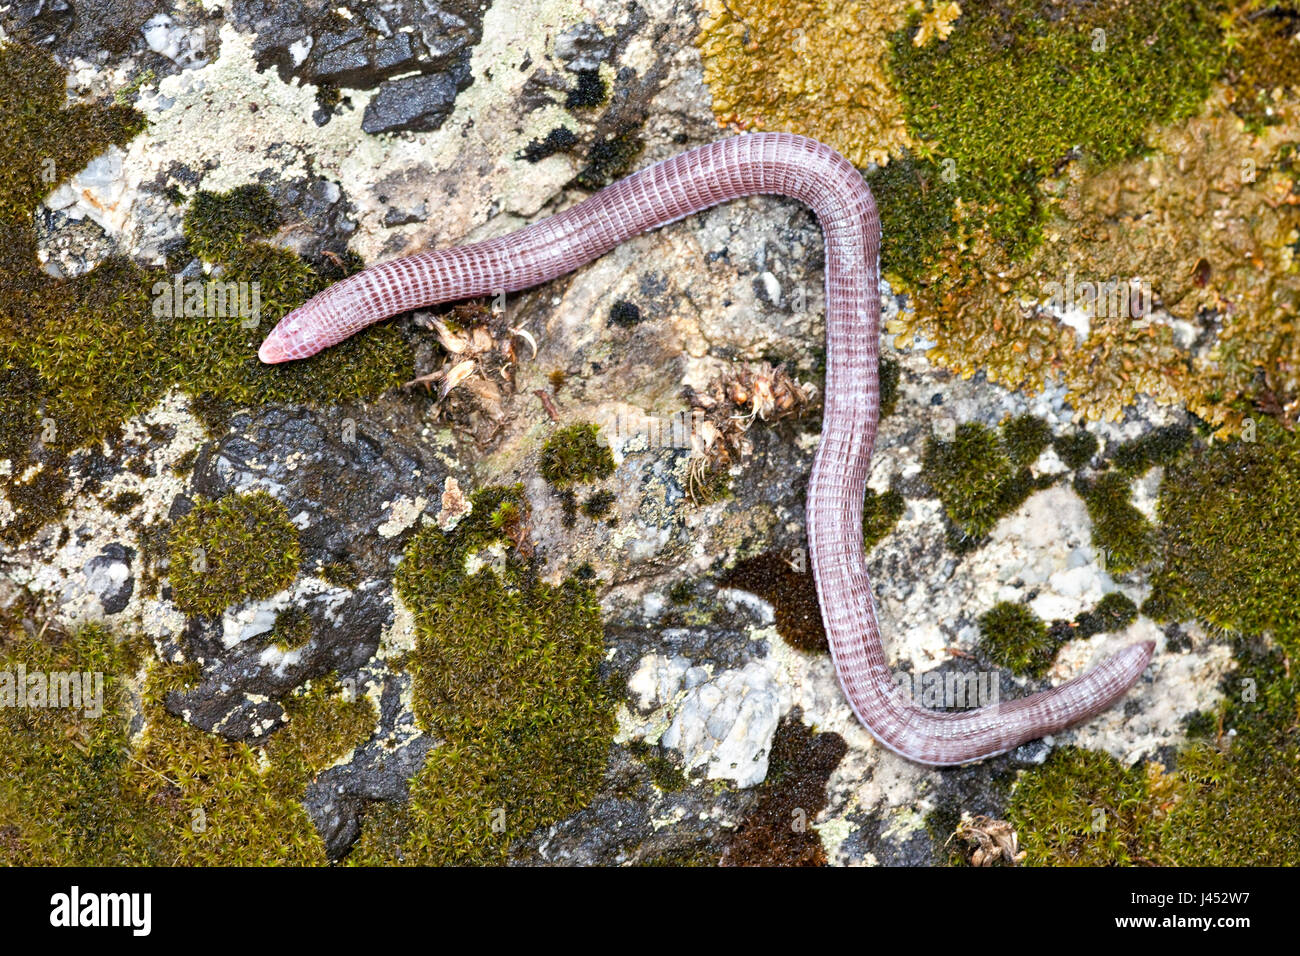 photo of an Anatolian worm lizard on a rock with lichens Stock Photo